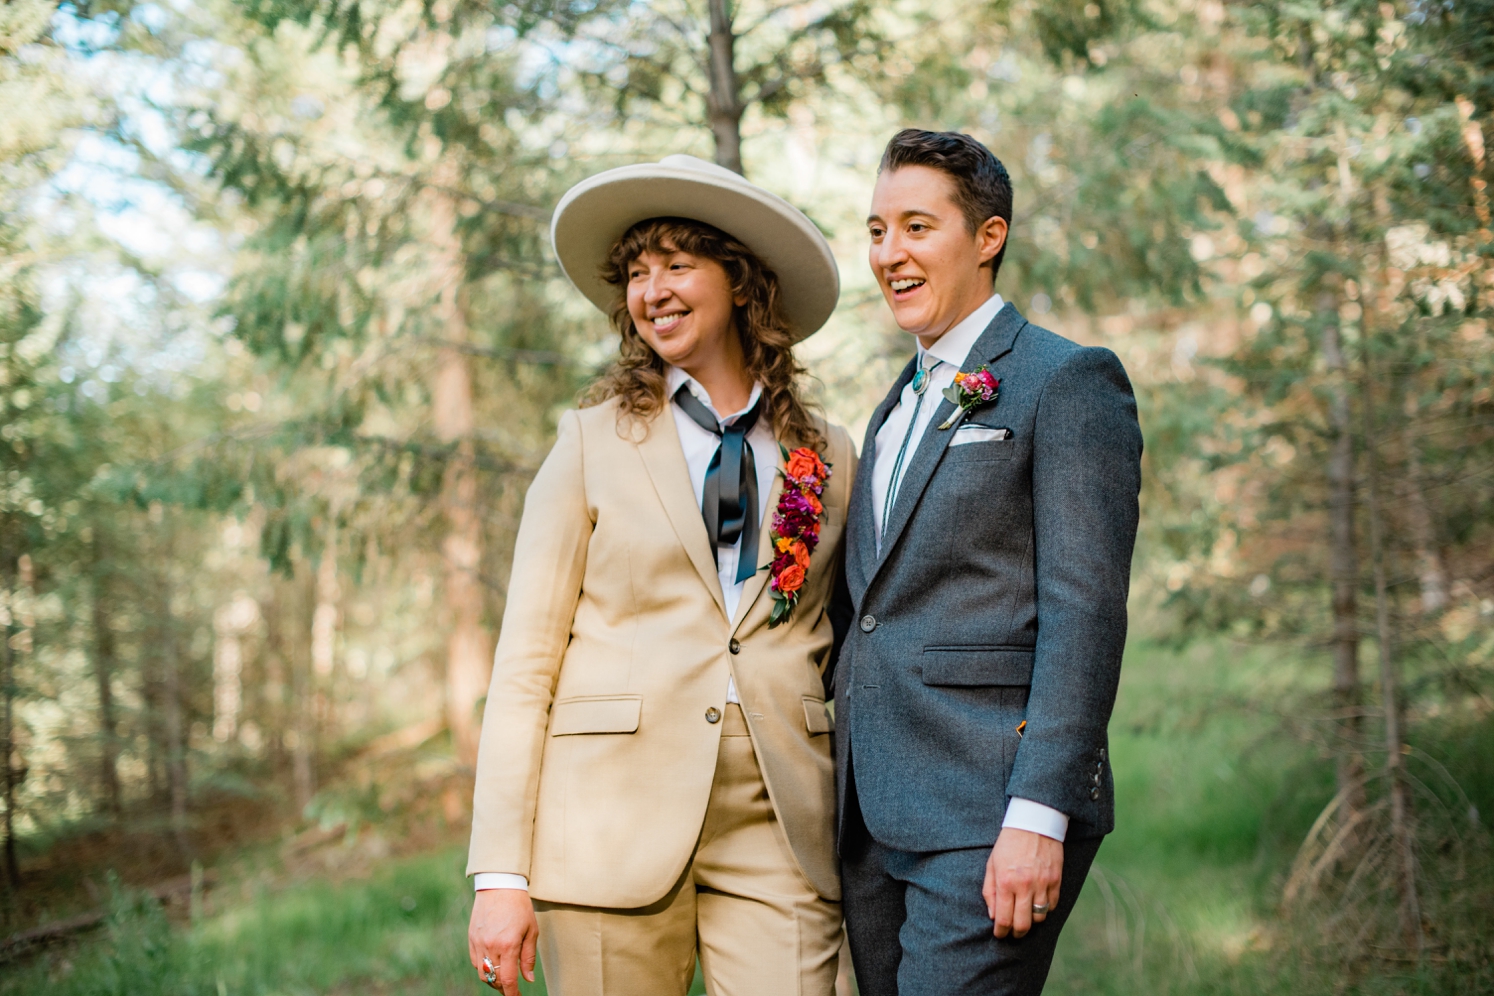 Full service wedding planner: Couple wearing suits standing in forest in Colorado at wedding | McArthur Weddings and Events